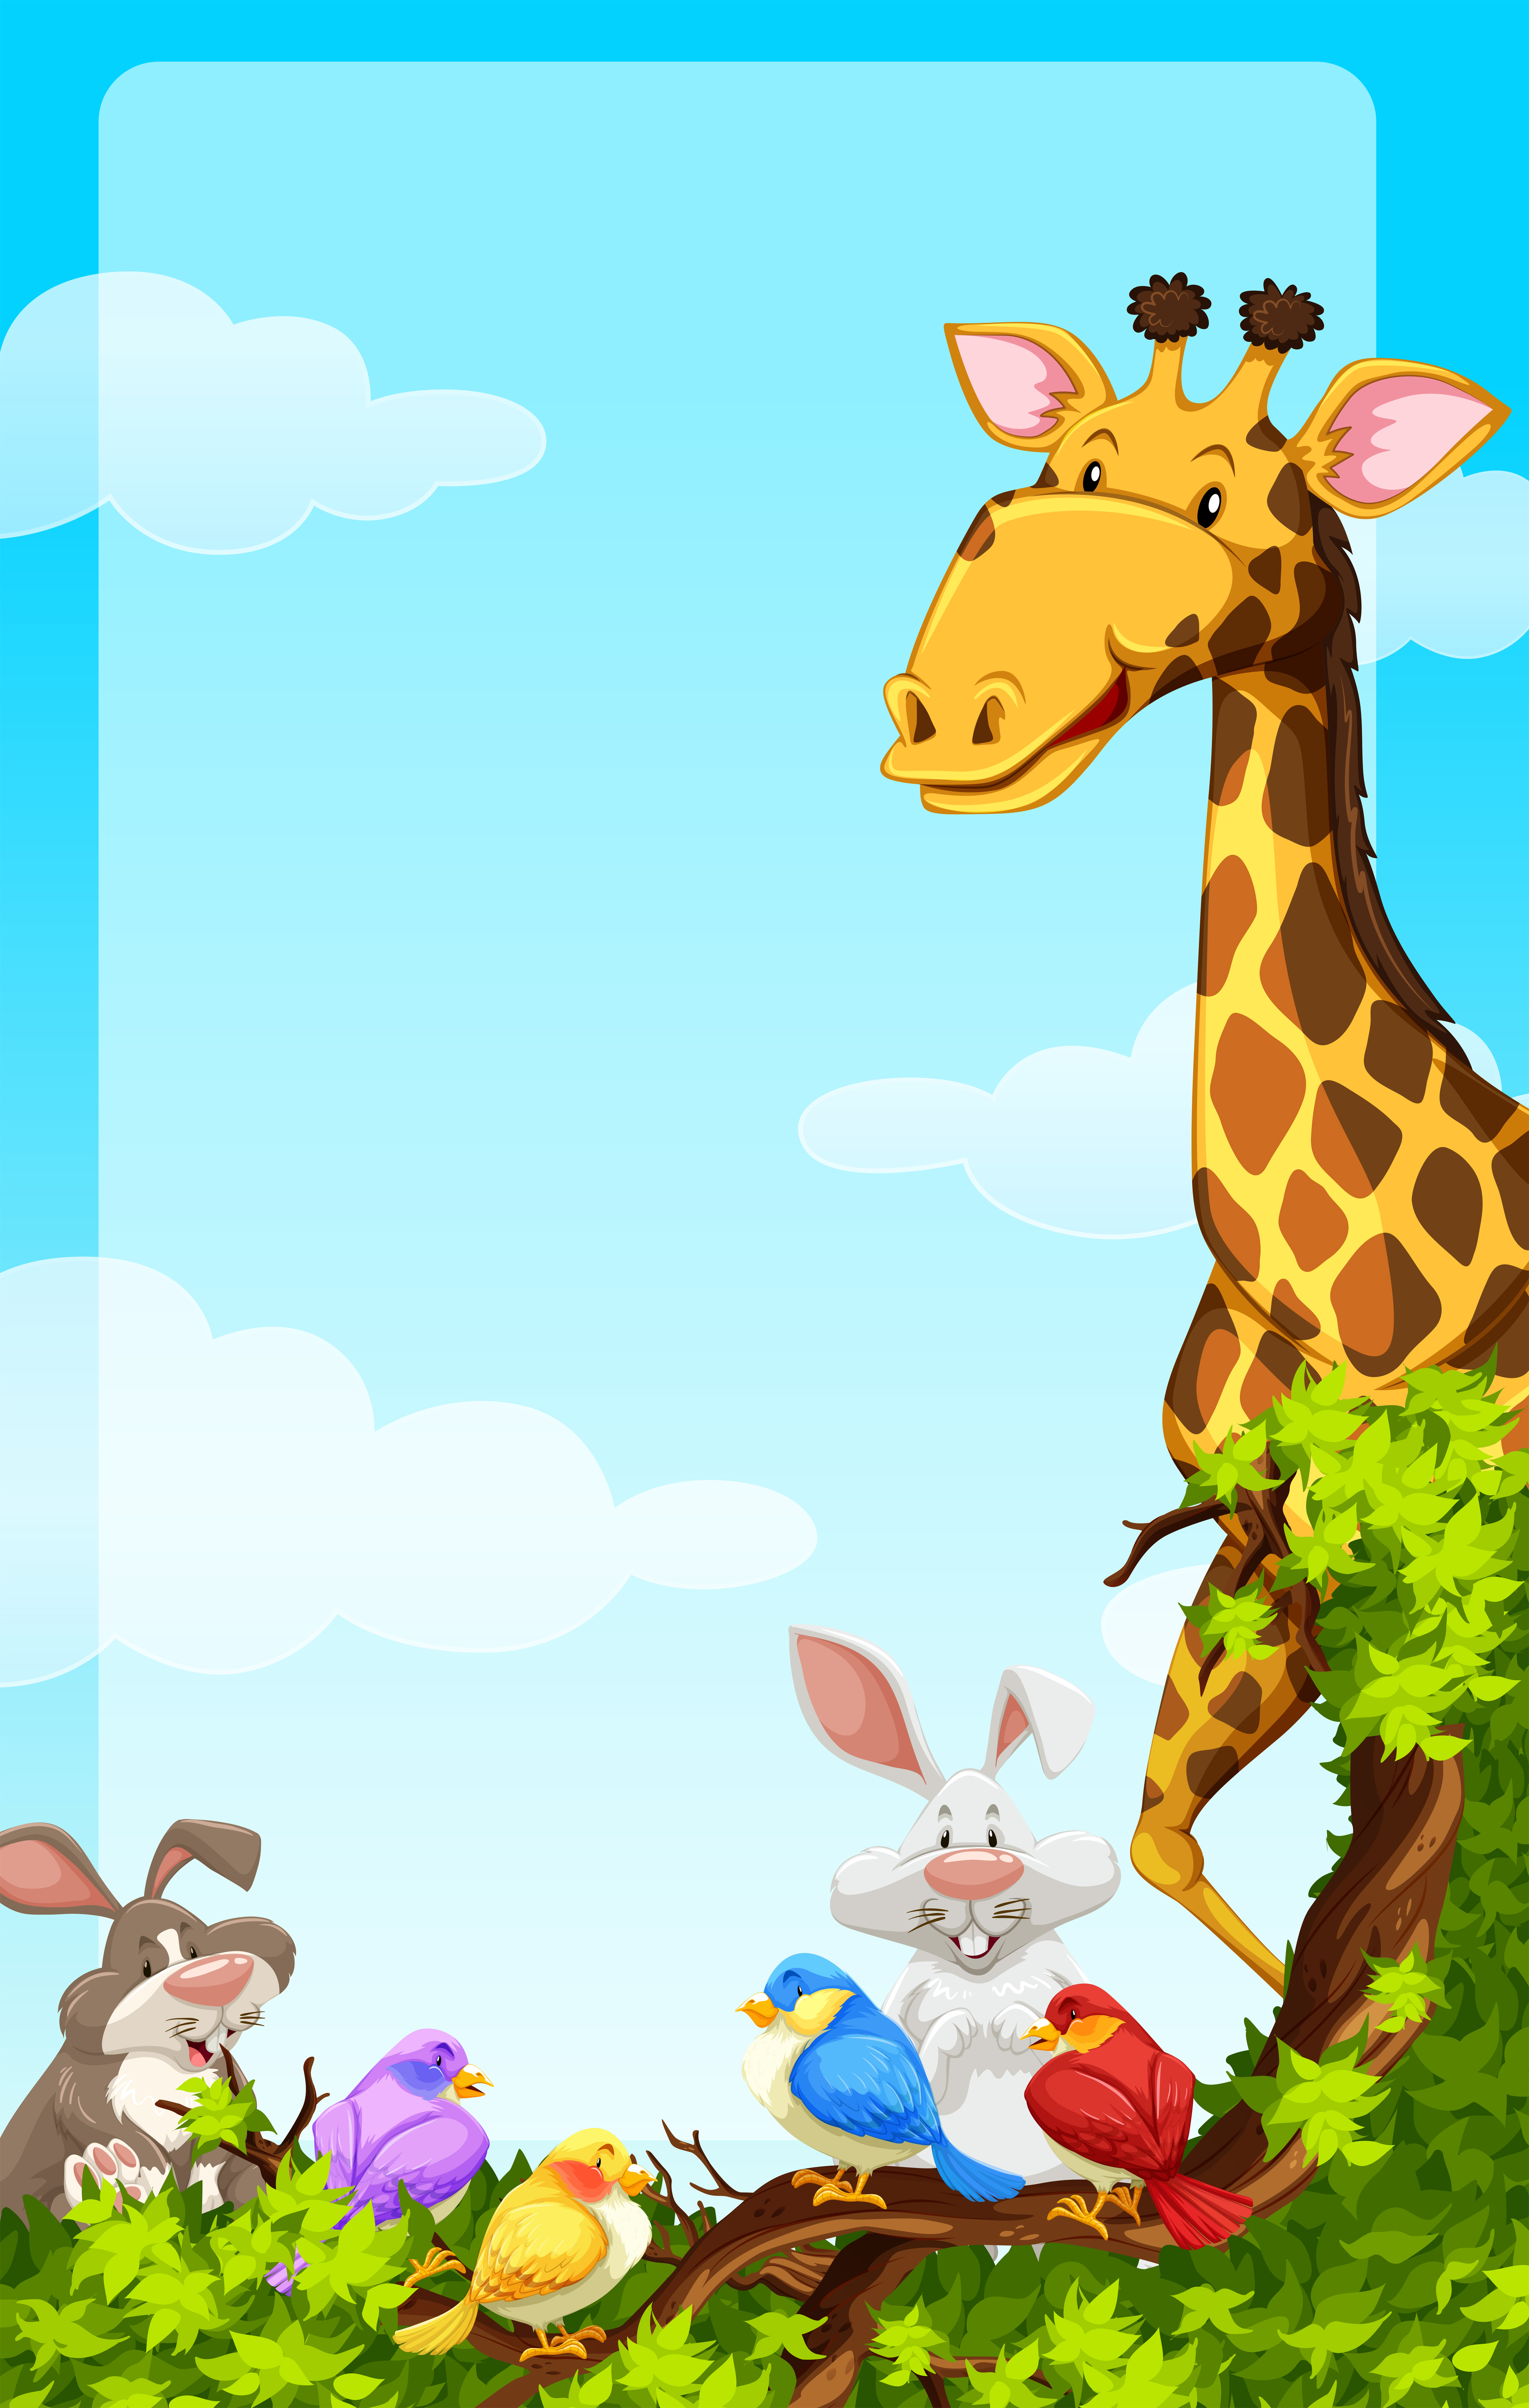 Background template with wild animals - Download Free Vectors, Clipart Graphics & Vector Art